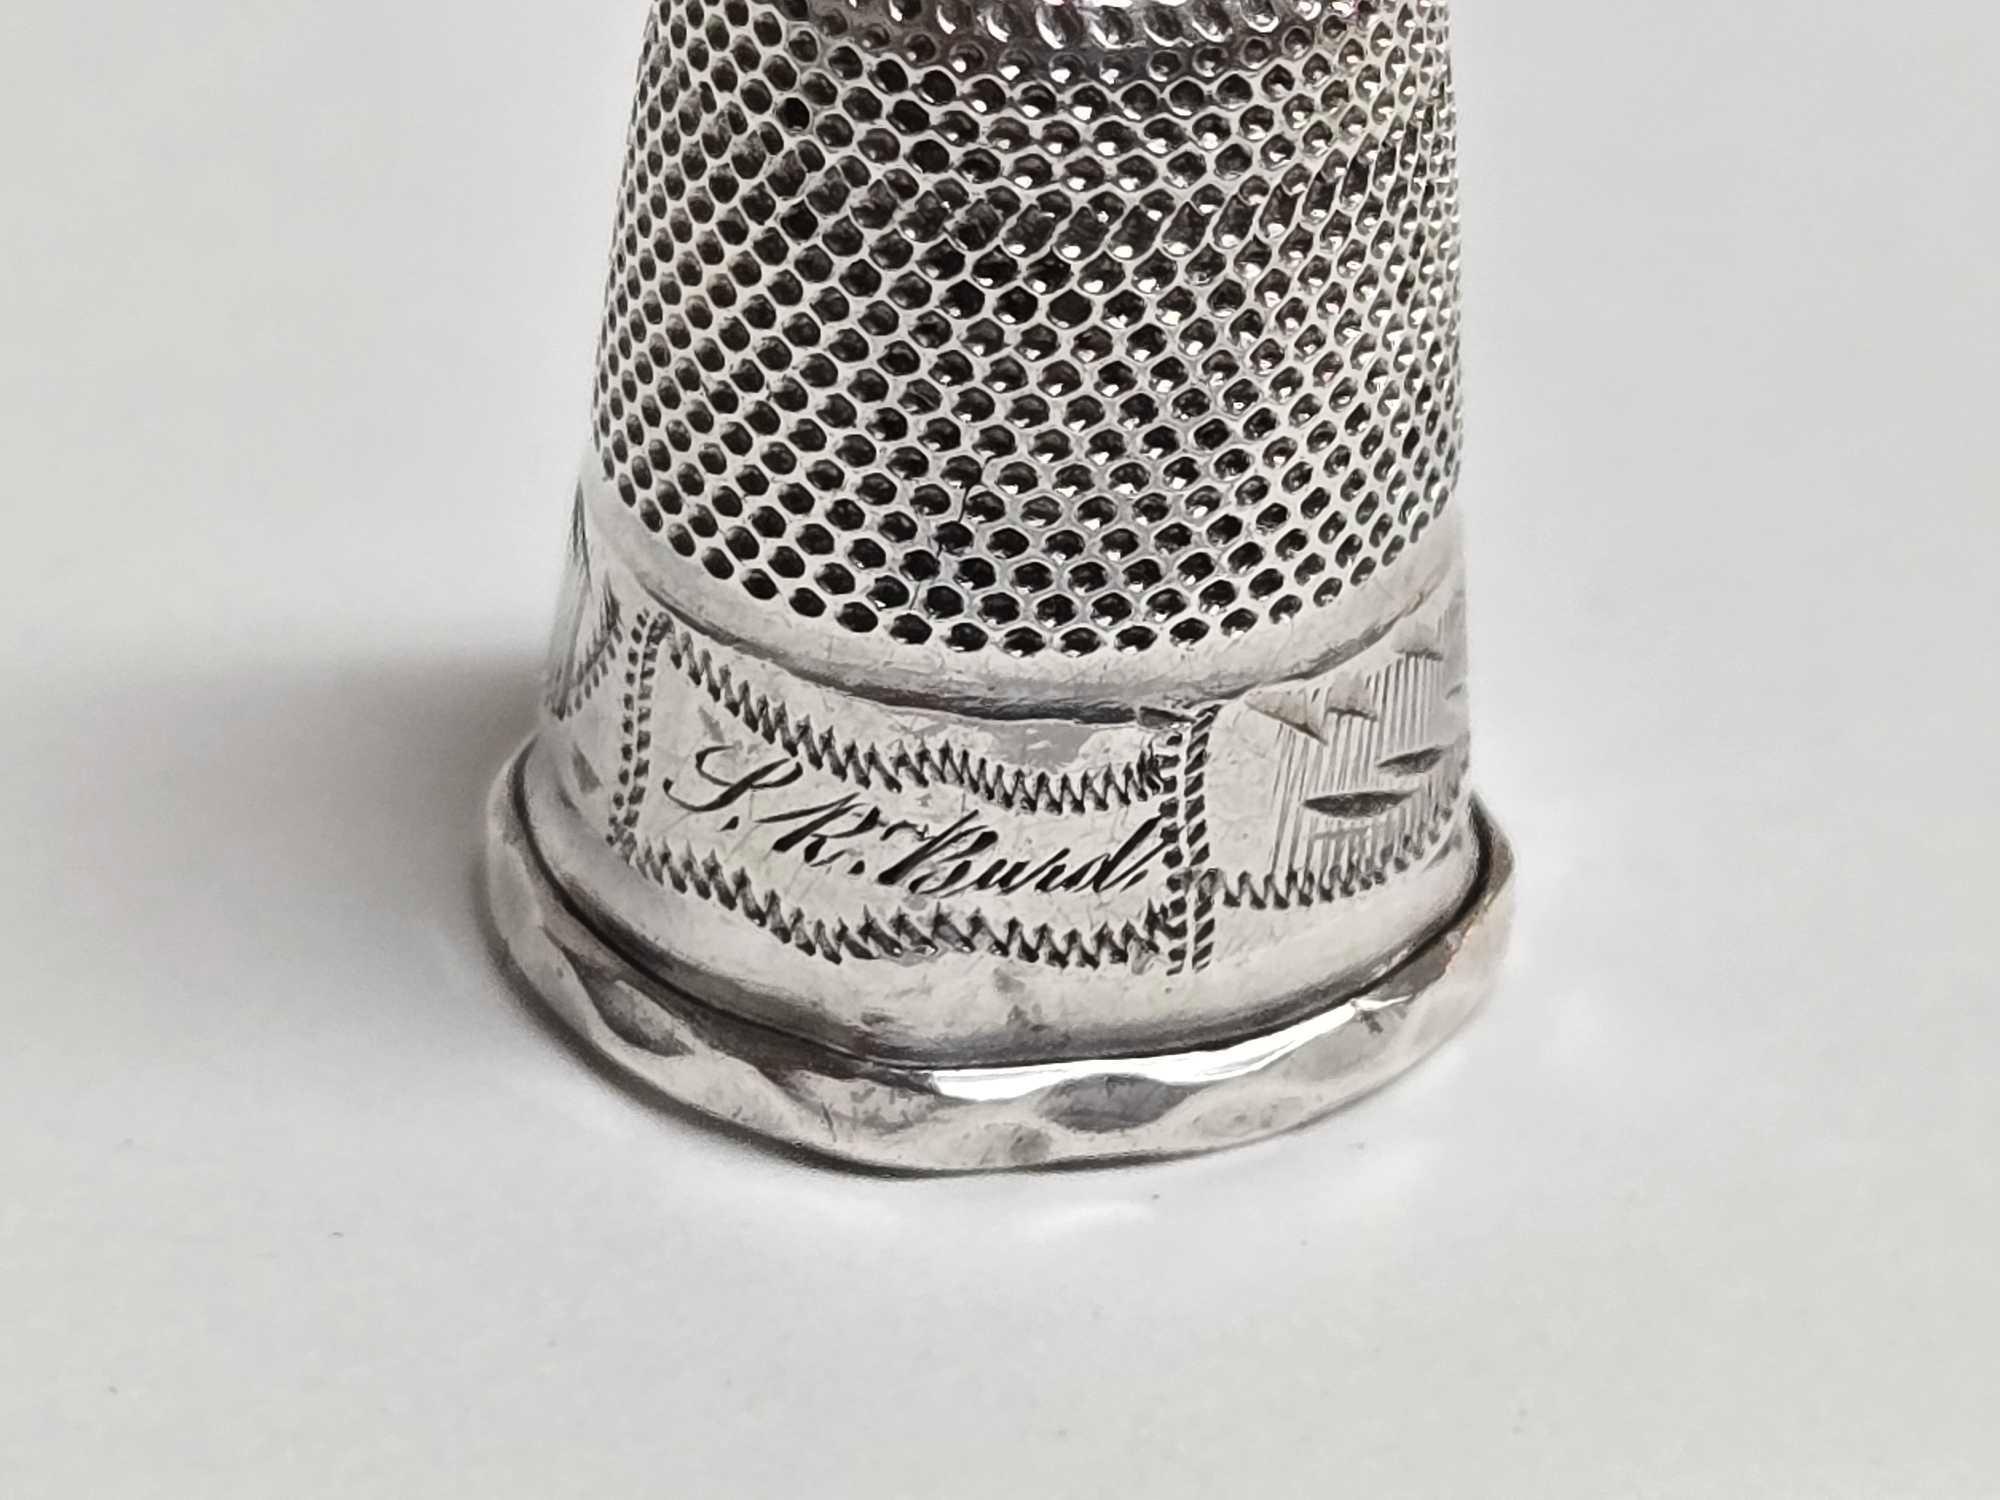 5 Antique Sterling Silver Thimbles with Hand Written Scroll Descriptions